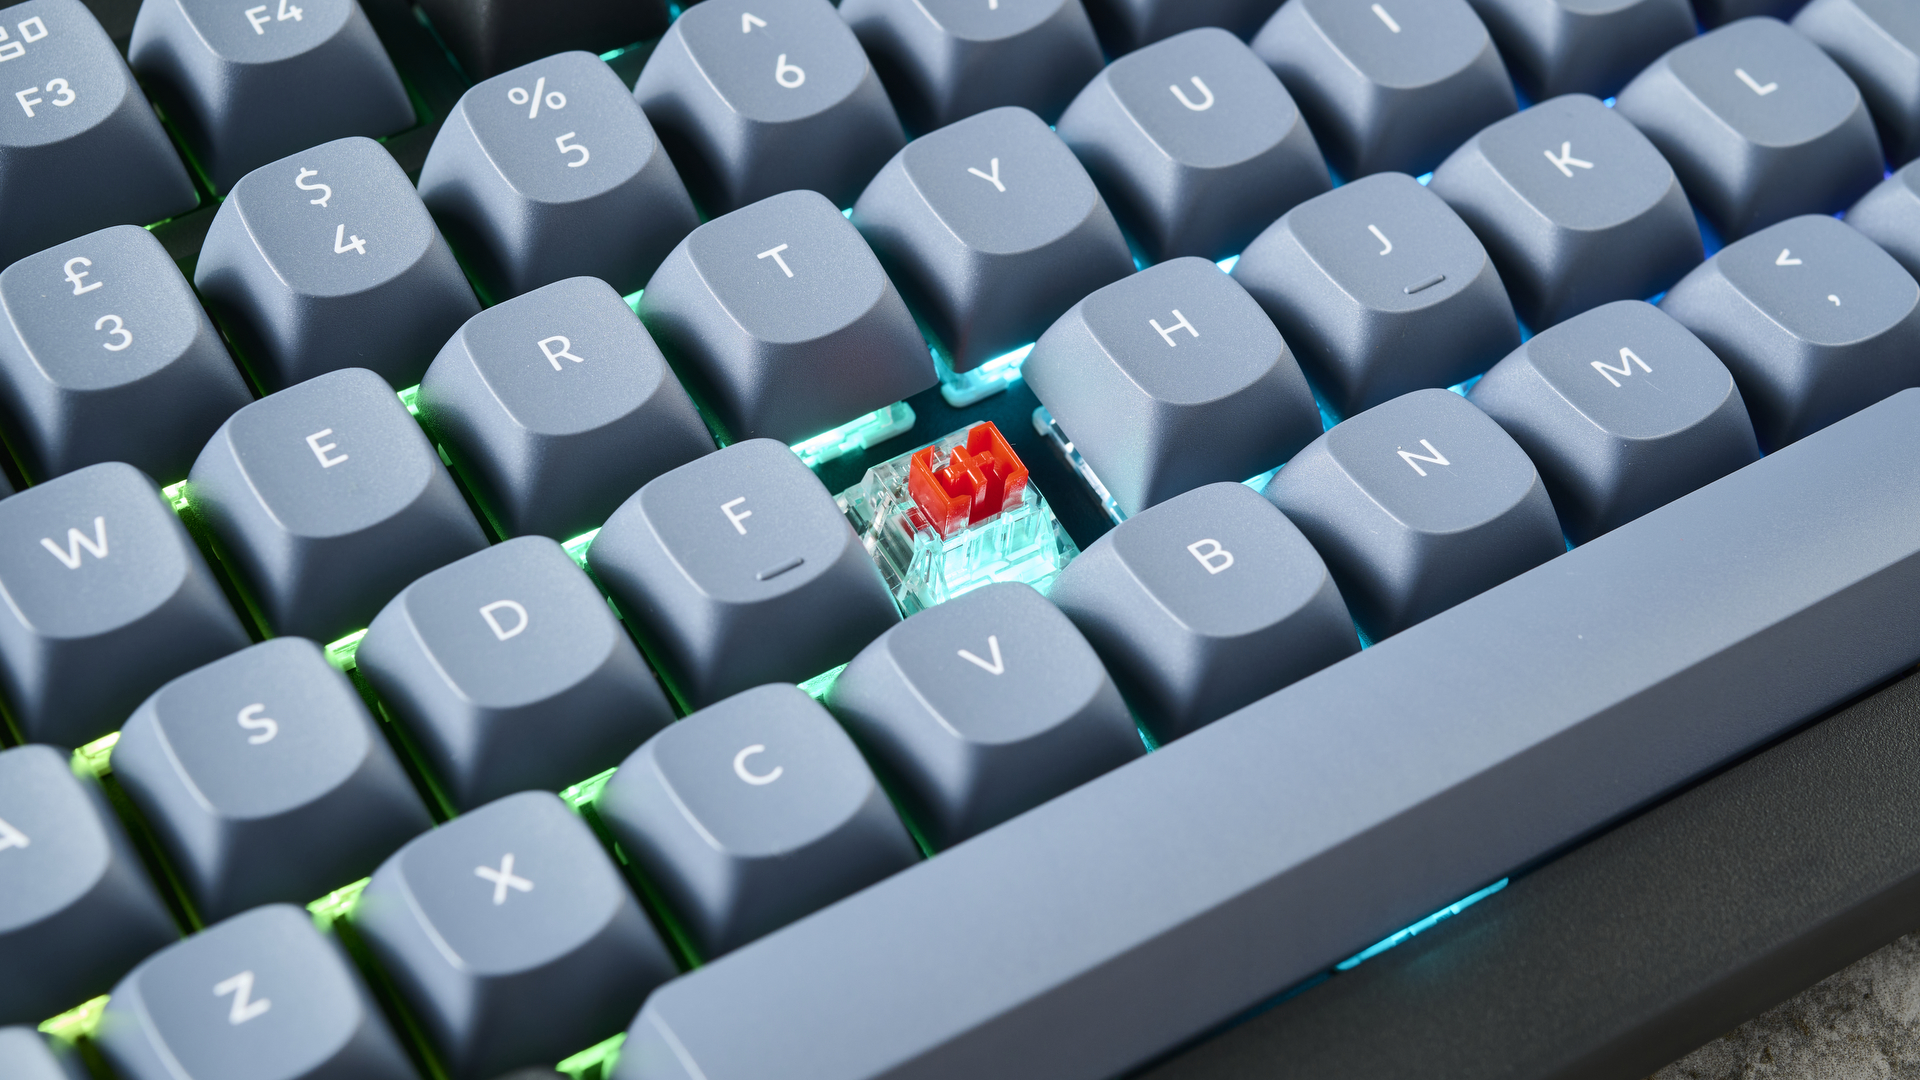 A Keychron V1 wired mechanical keyboard, in the frosted black (translucent) colorway